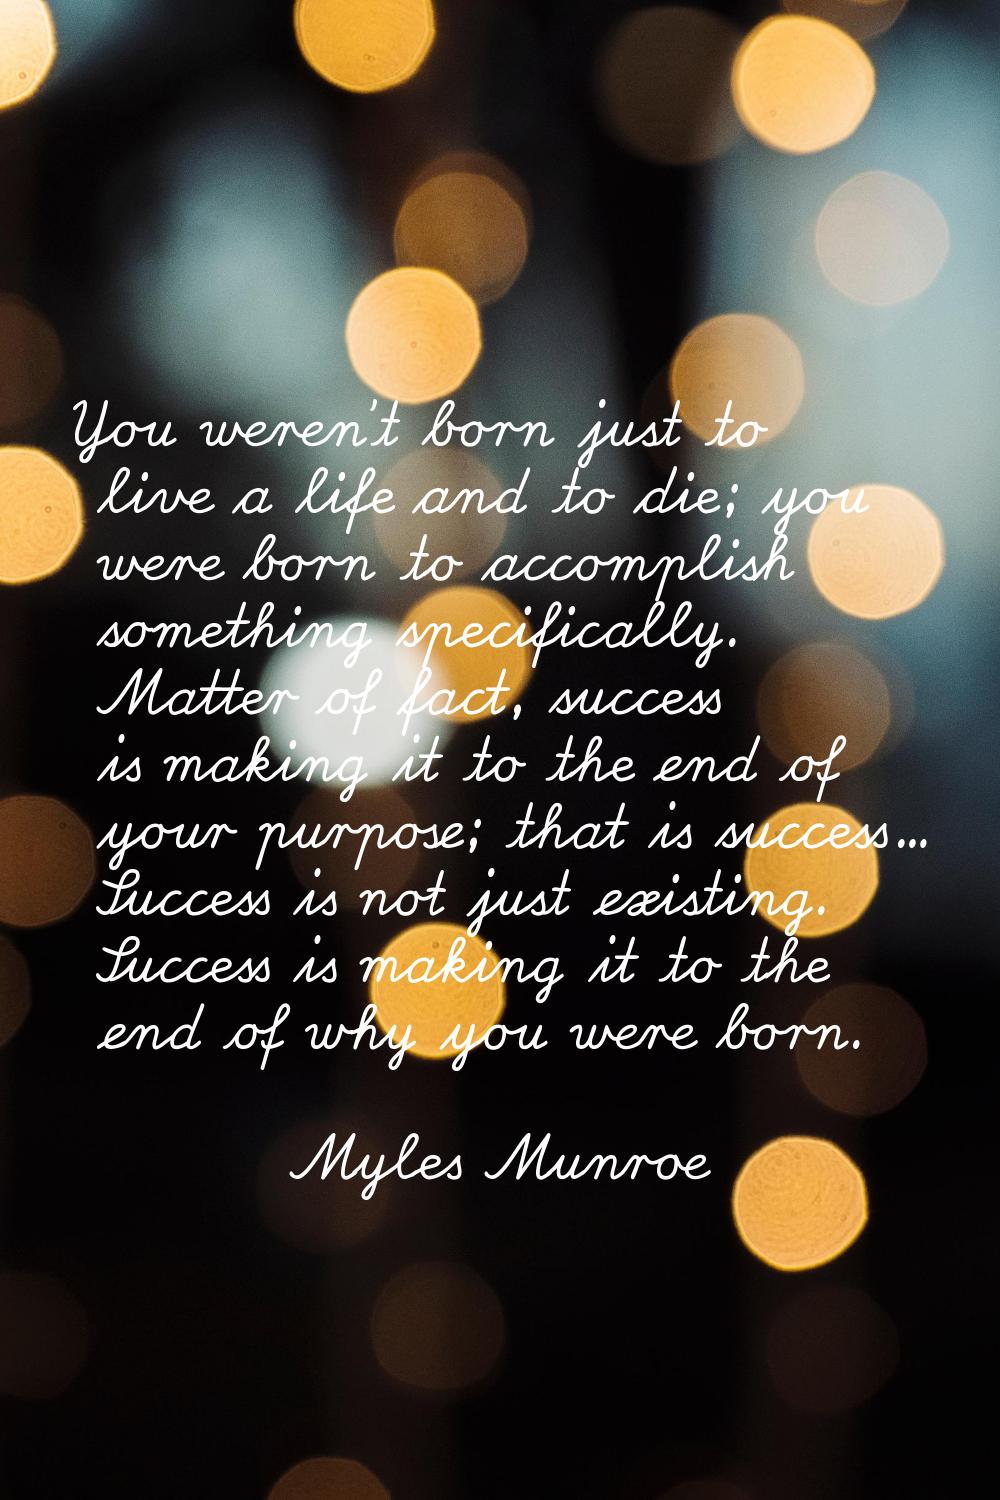 You weren't born just to live a life and to die; you were born to accomplish something specifically